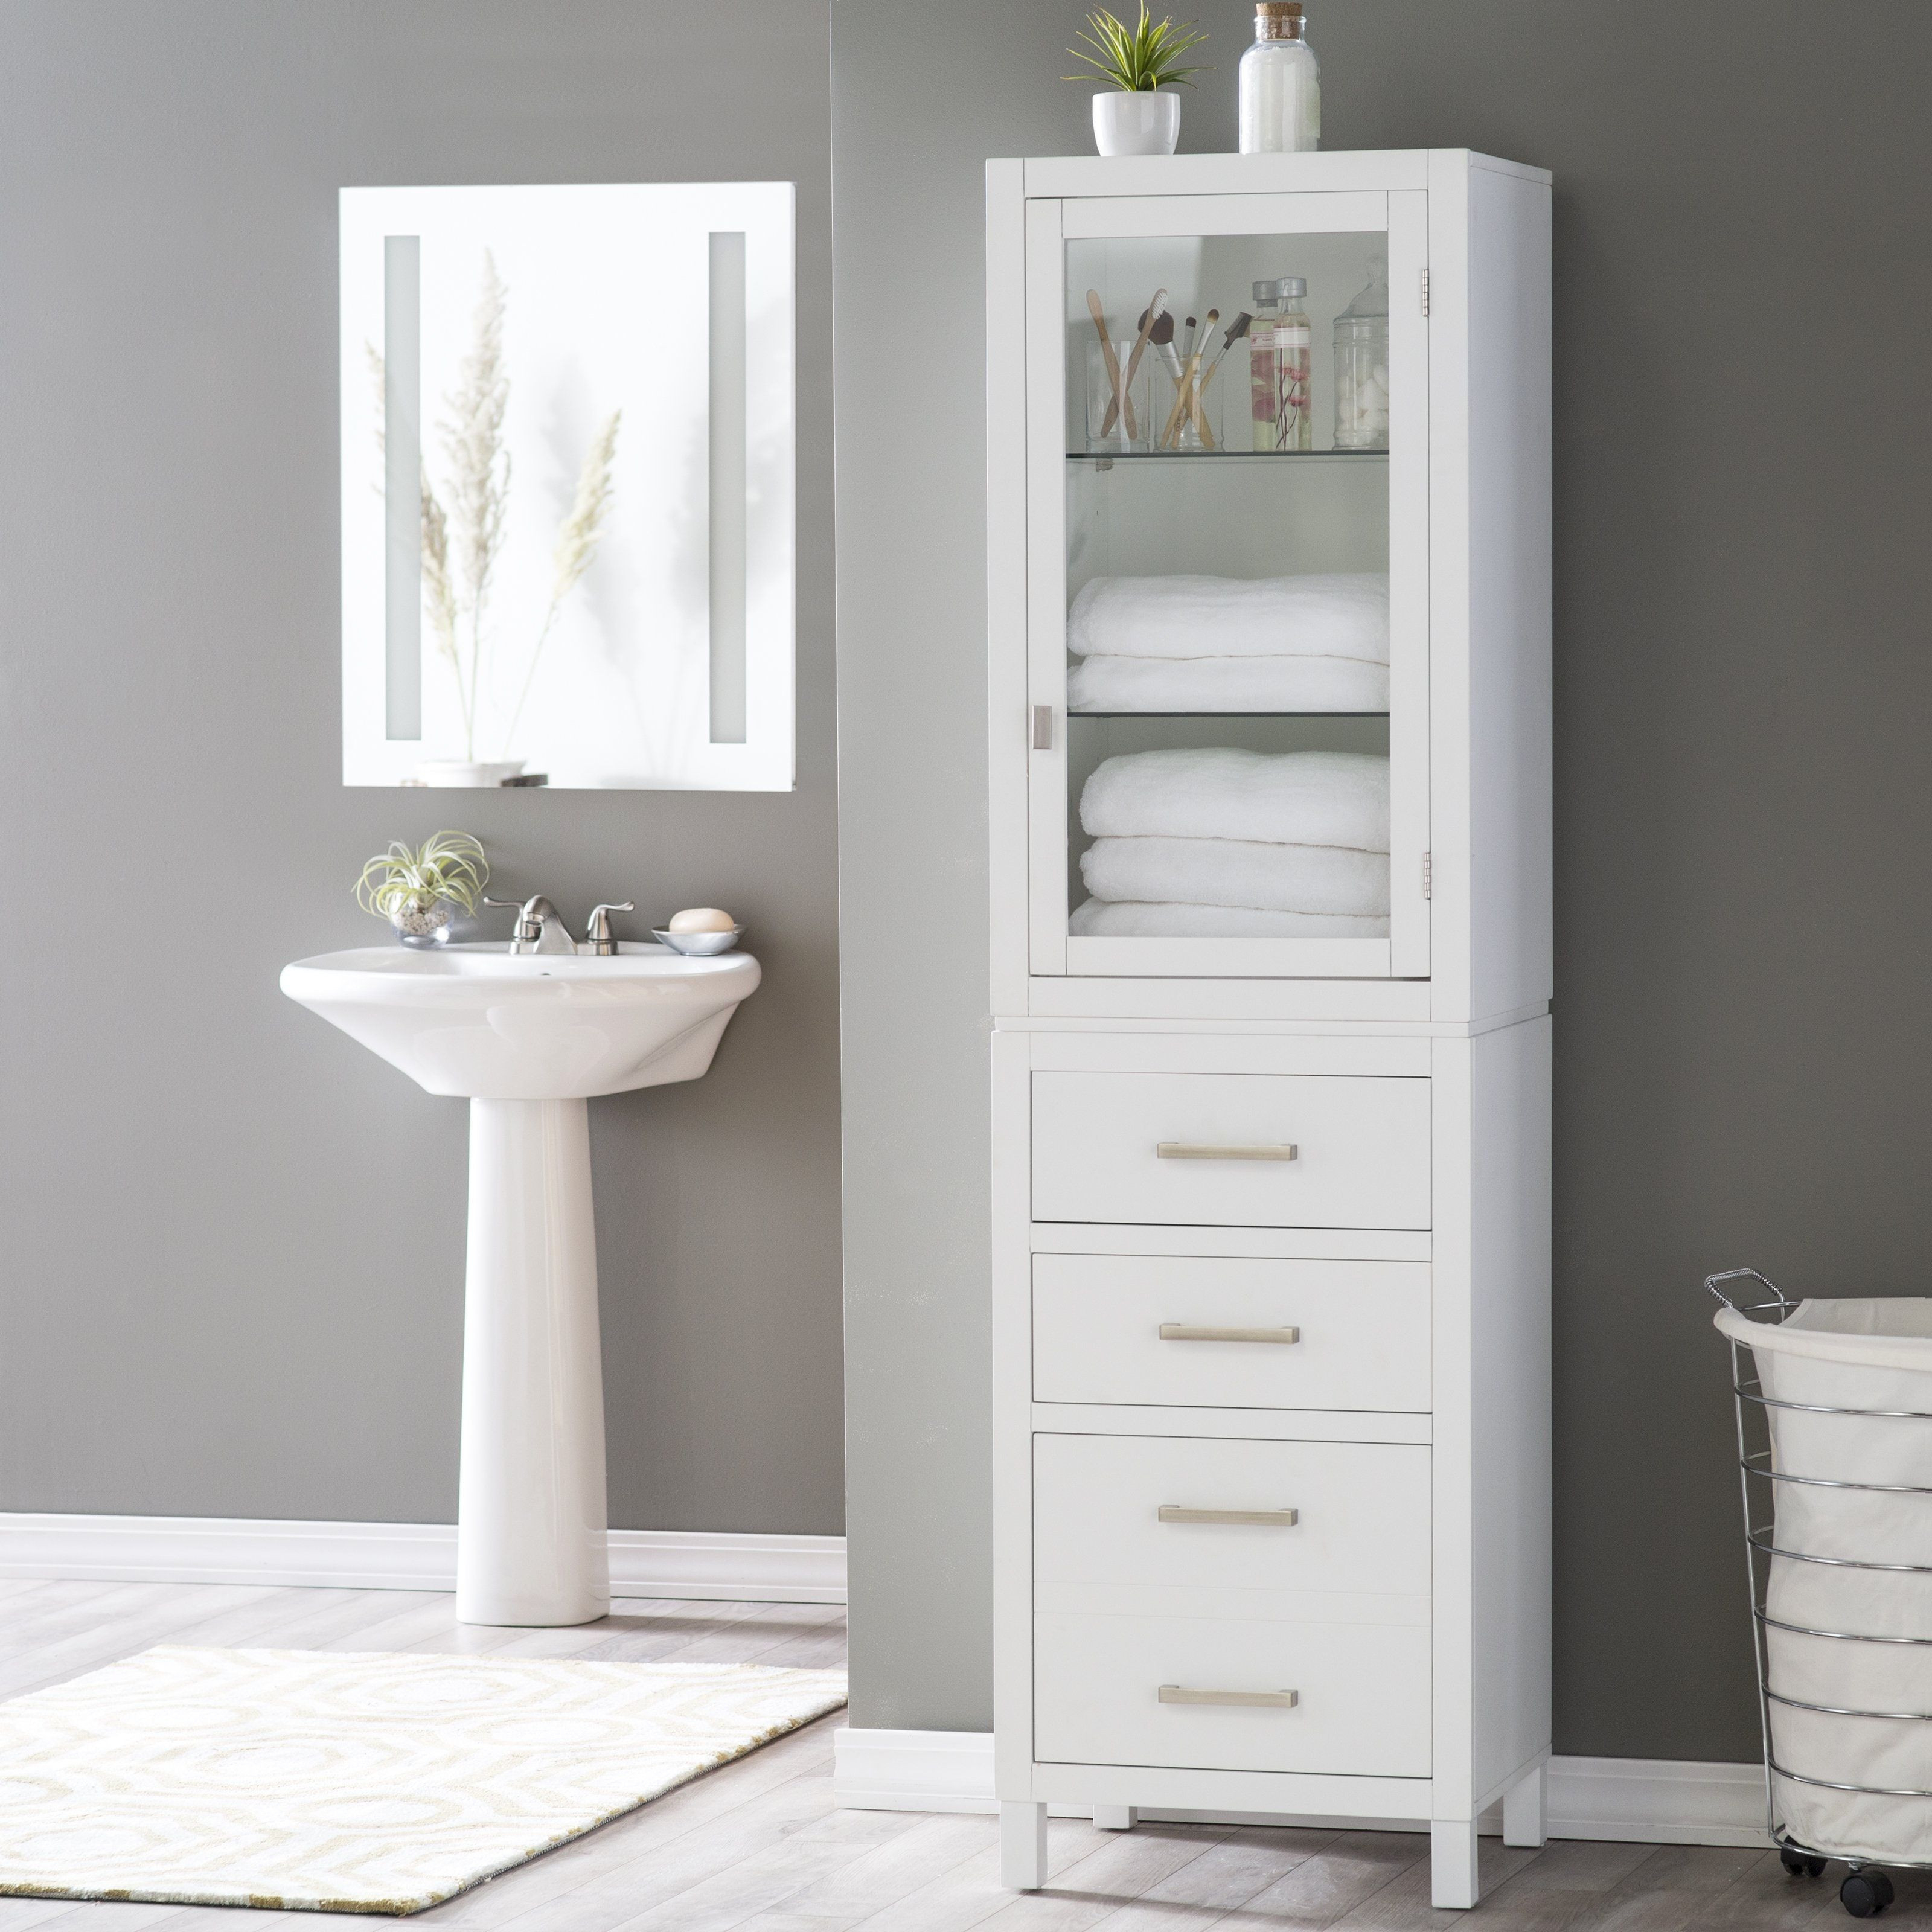 Inspirational Tall Corner Bathroom Cabinet for dimensions 3200 X 3200